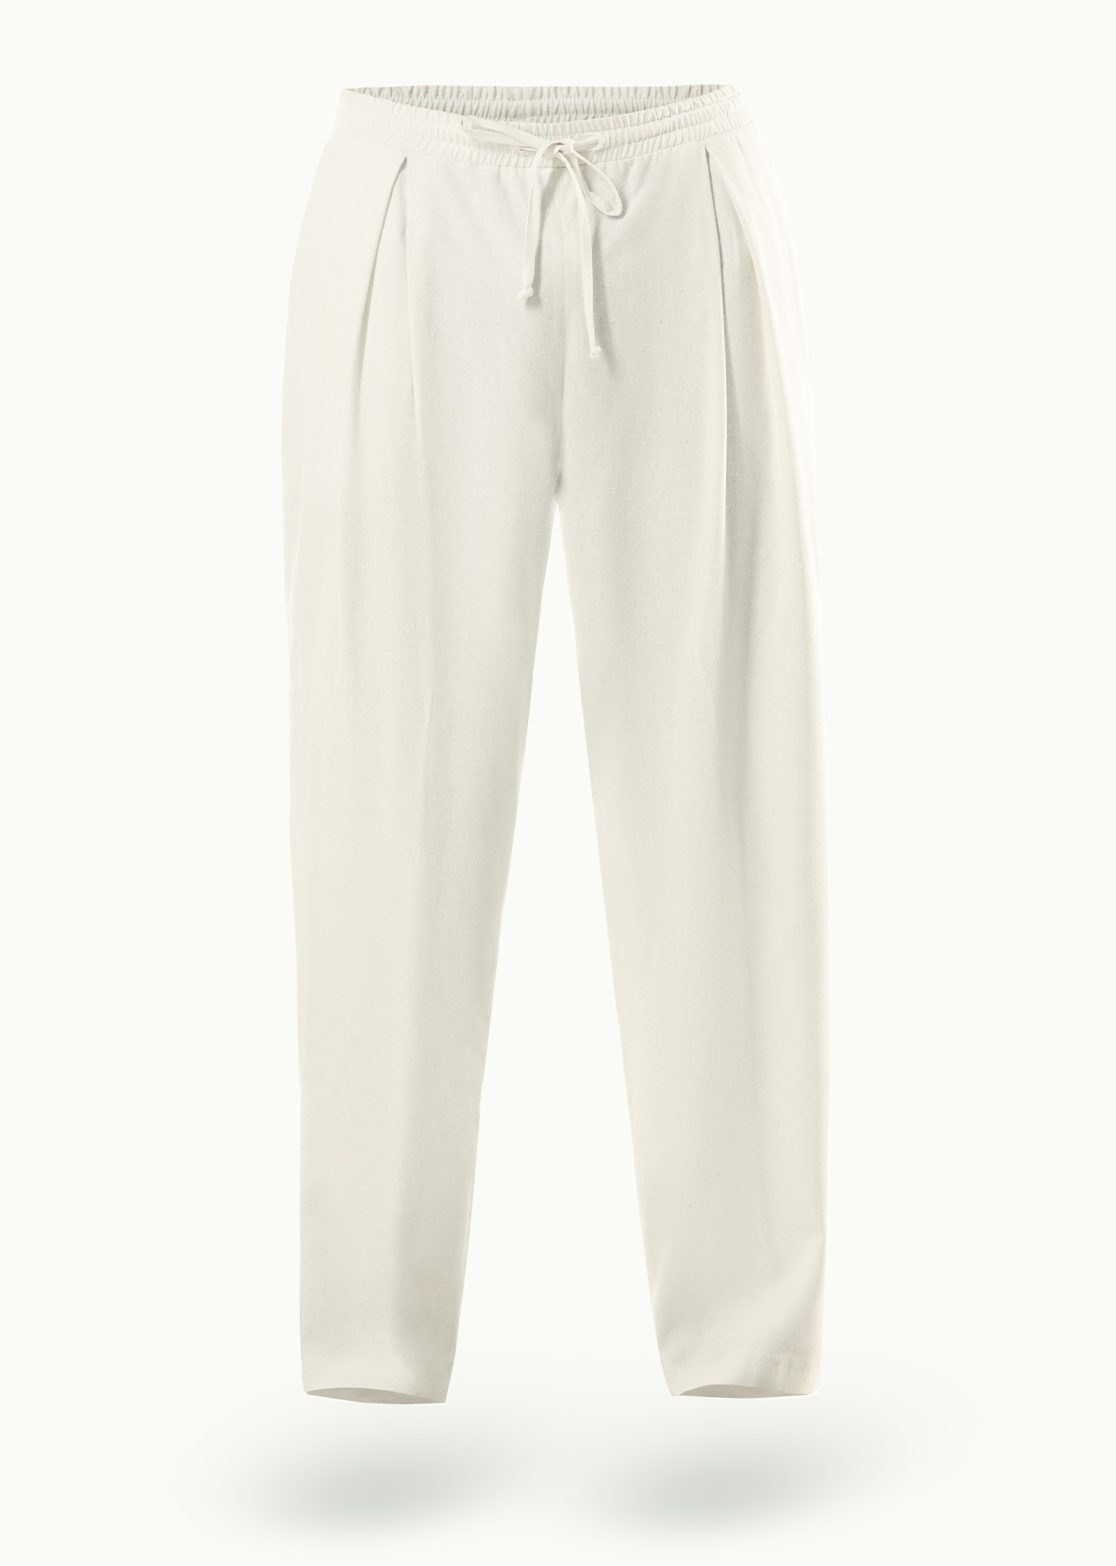 Men - Trousers - Oasis Silk Trousers Image Primary